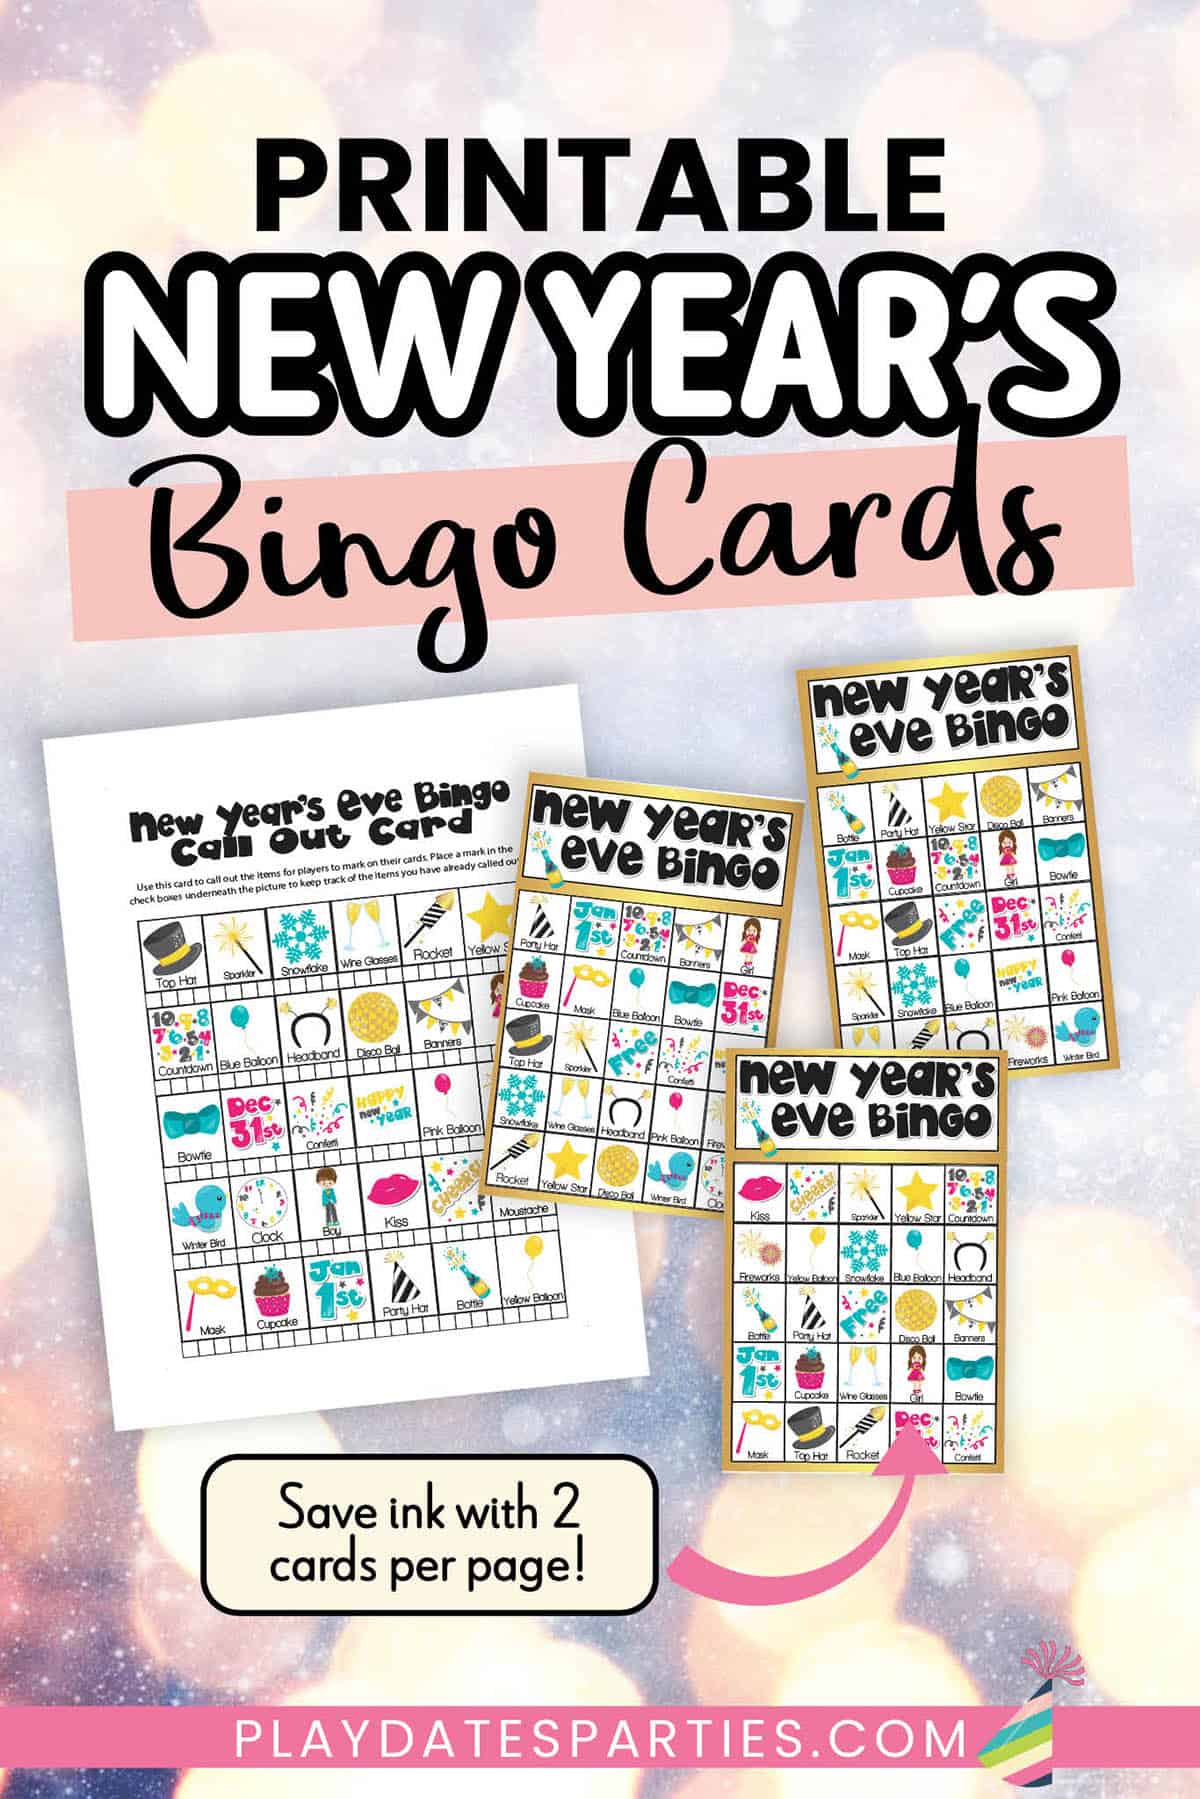 Printable New Year's bingo cards with a call out card.